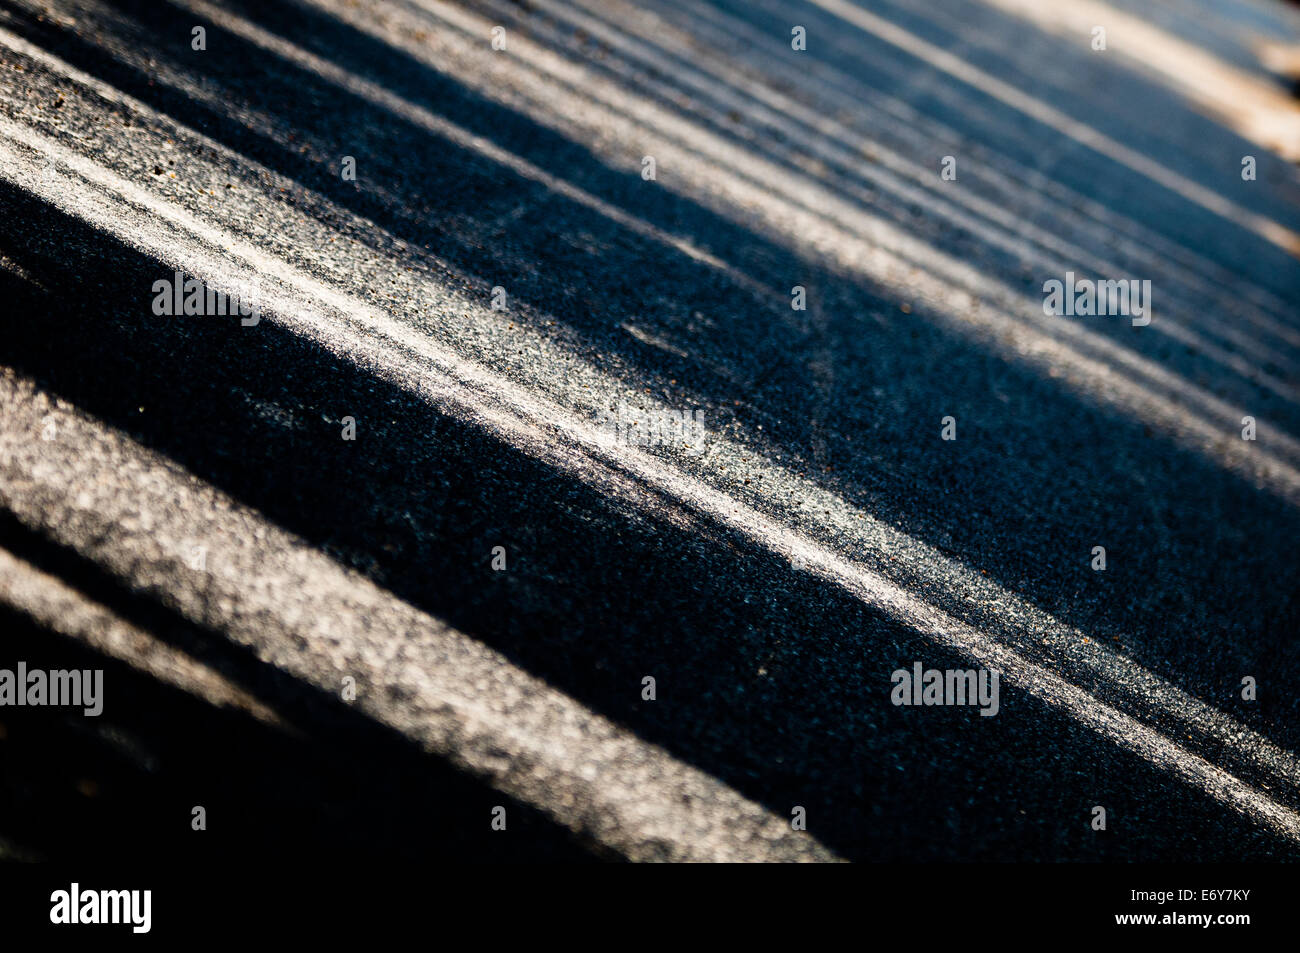 Abstract background of tan lines on black background Stock Photo